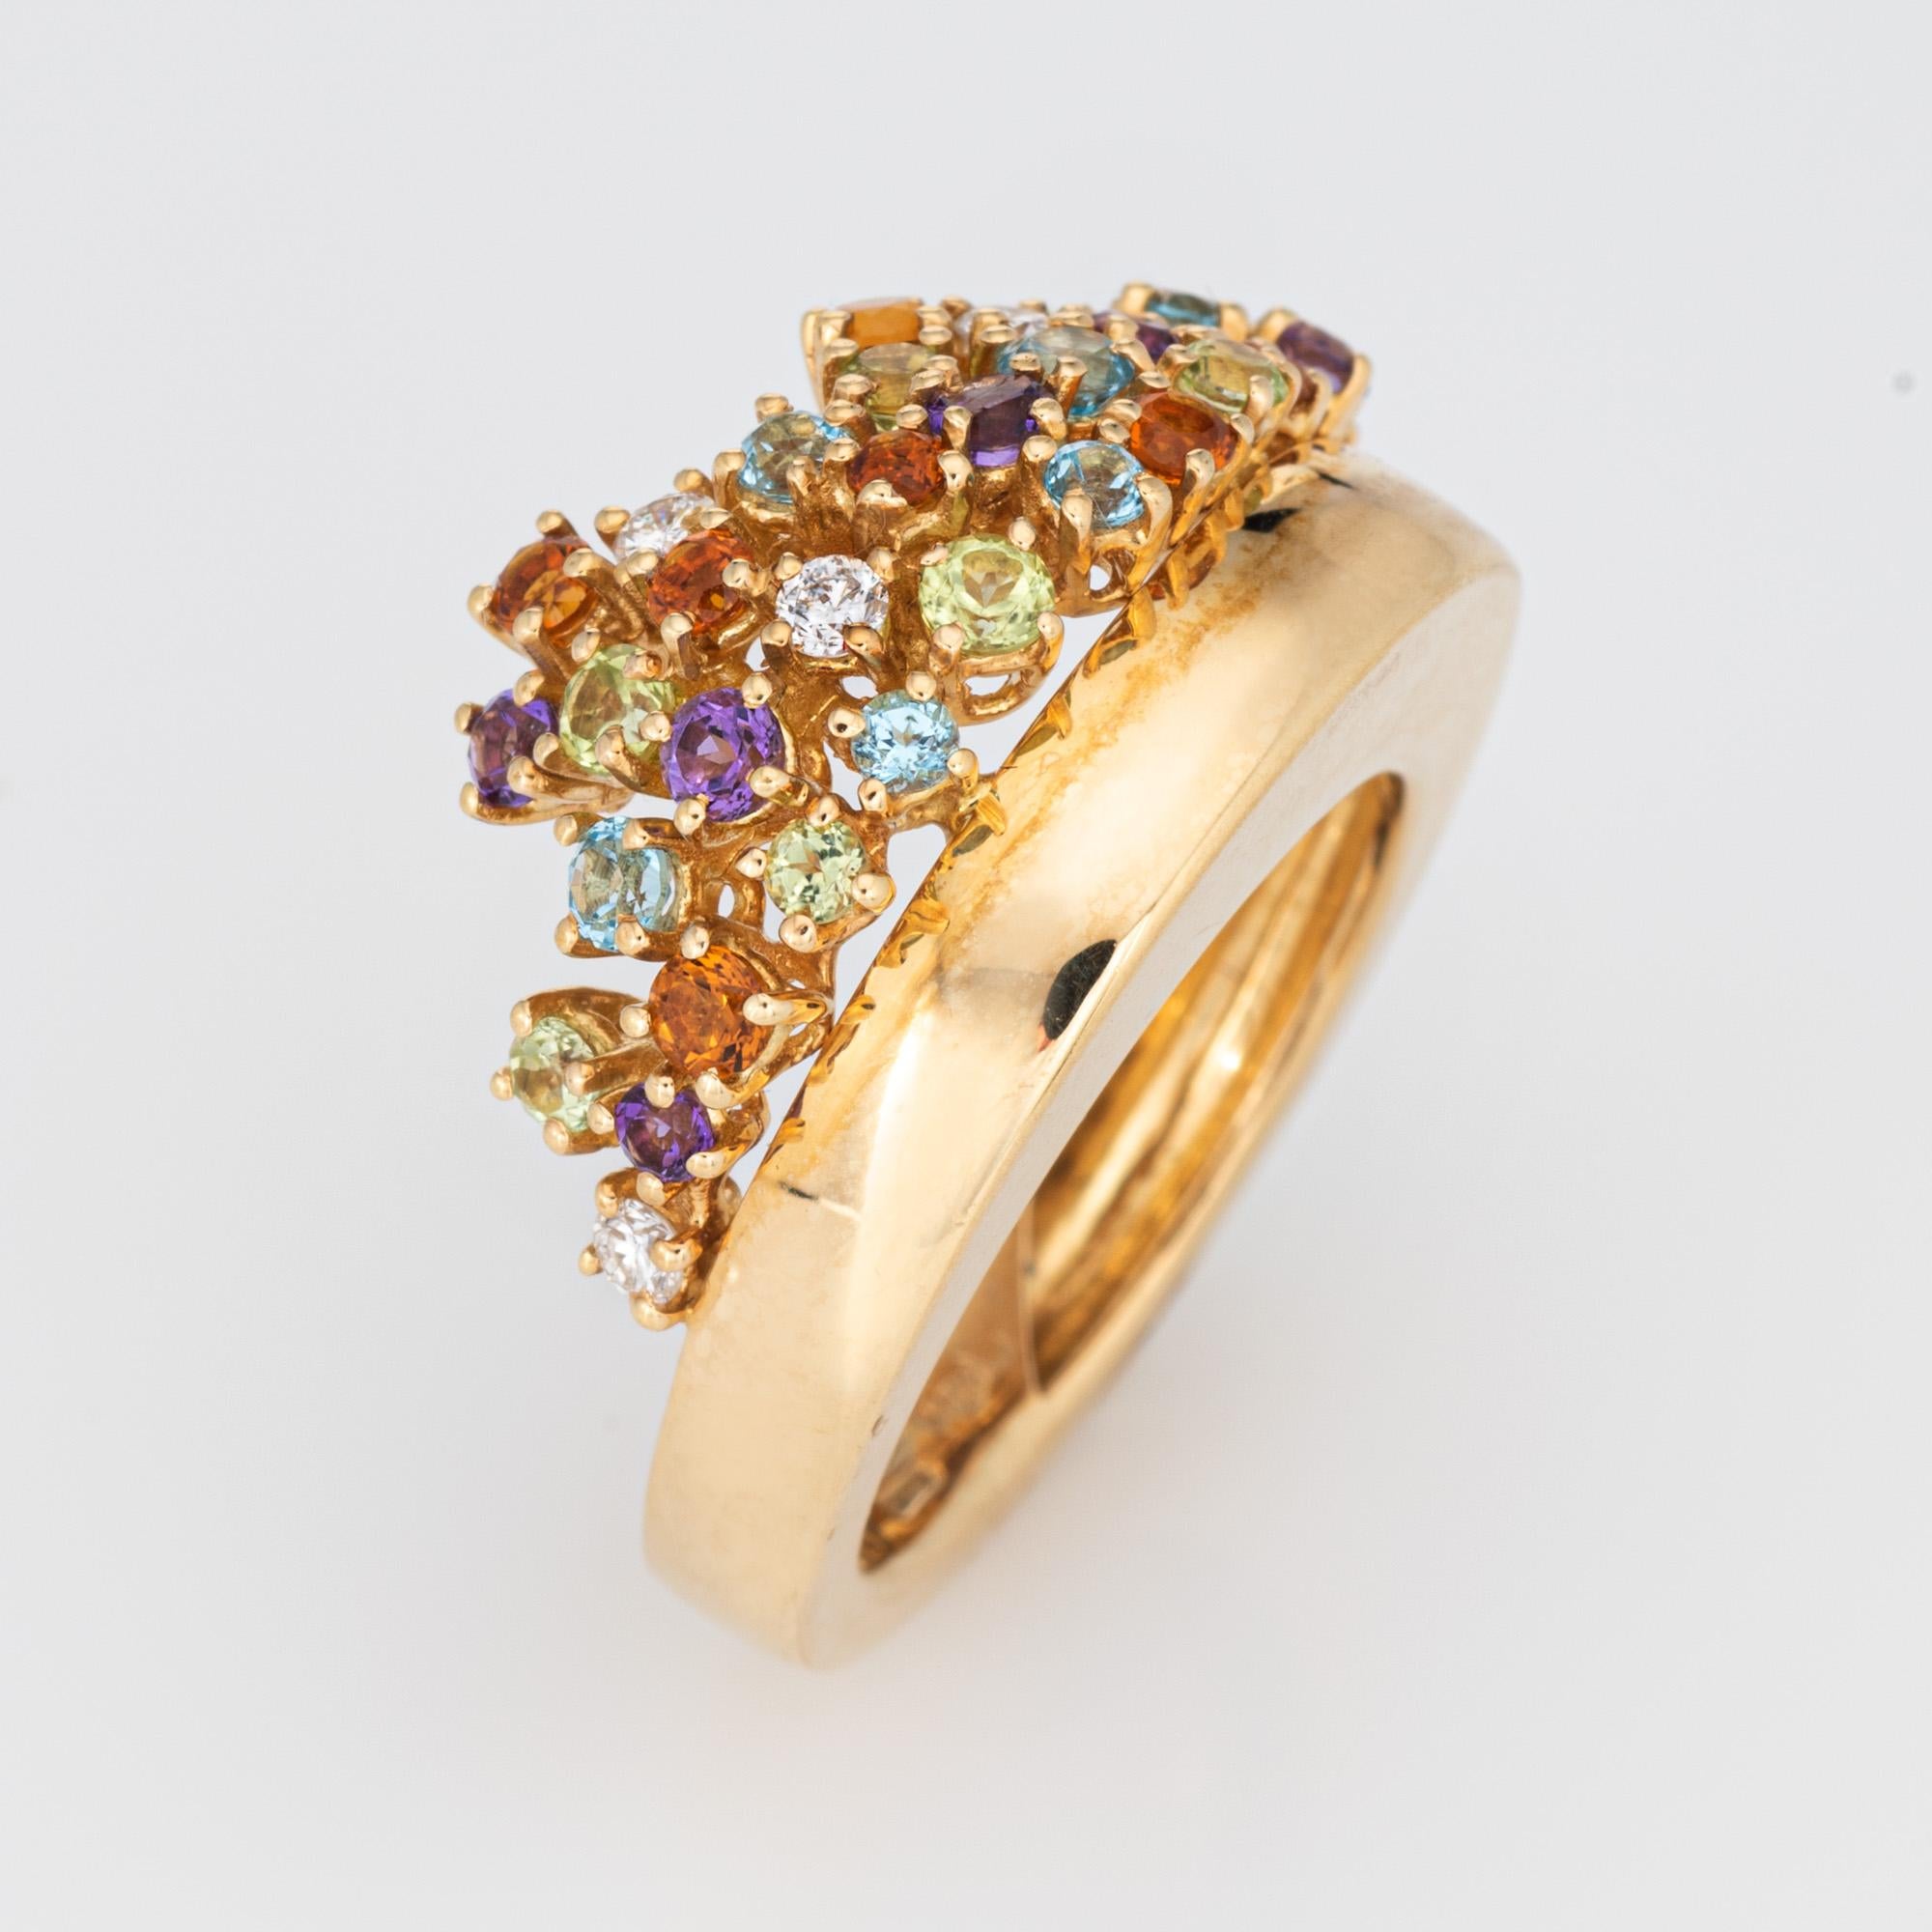 Stylish multi gemstone confetti ring crafted in 18 karat yellow gold. 

Semi-precious gemstones (citrine, blue topaz, amethyst and peridot). Diamonds total an estimated 0.25 carats (estimated at H-I color and SI1 clarity). The stones are in very